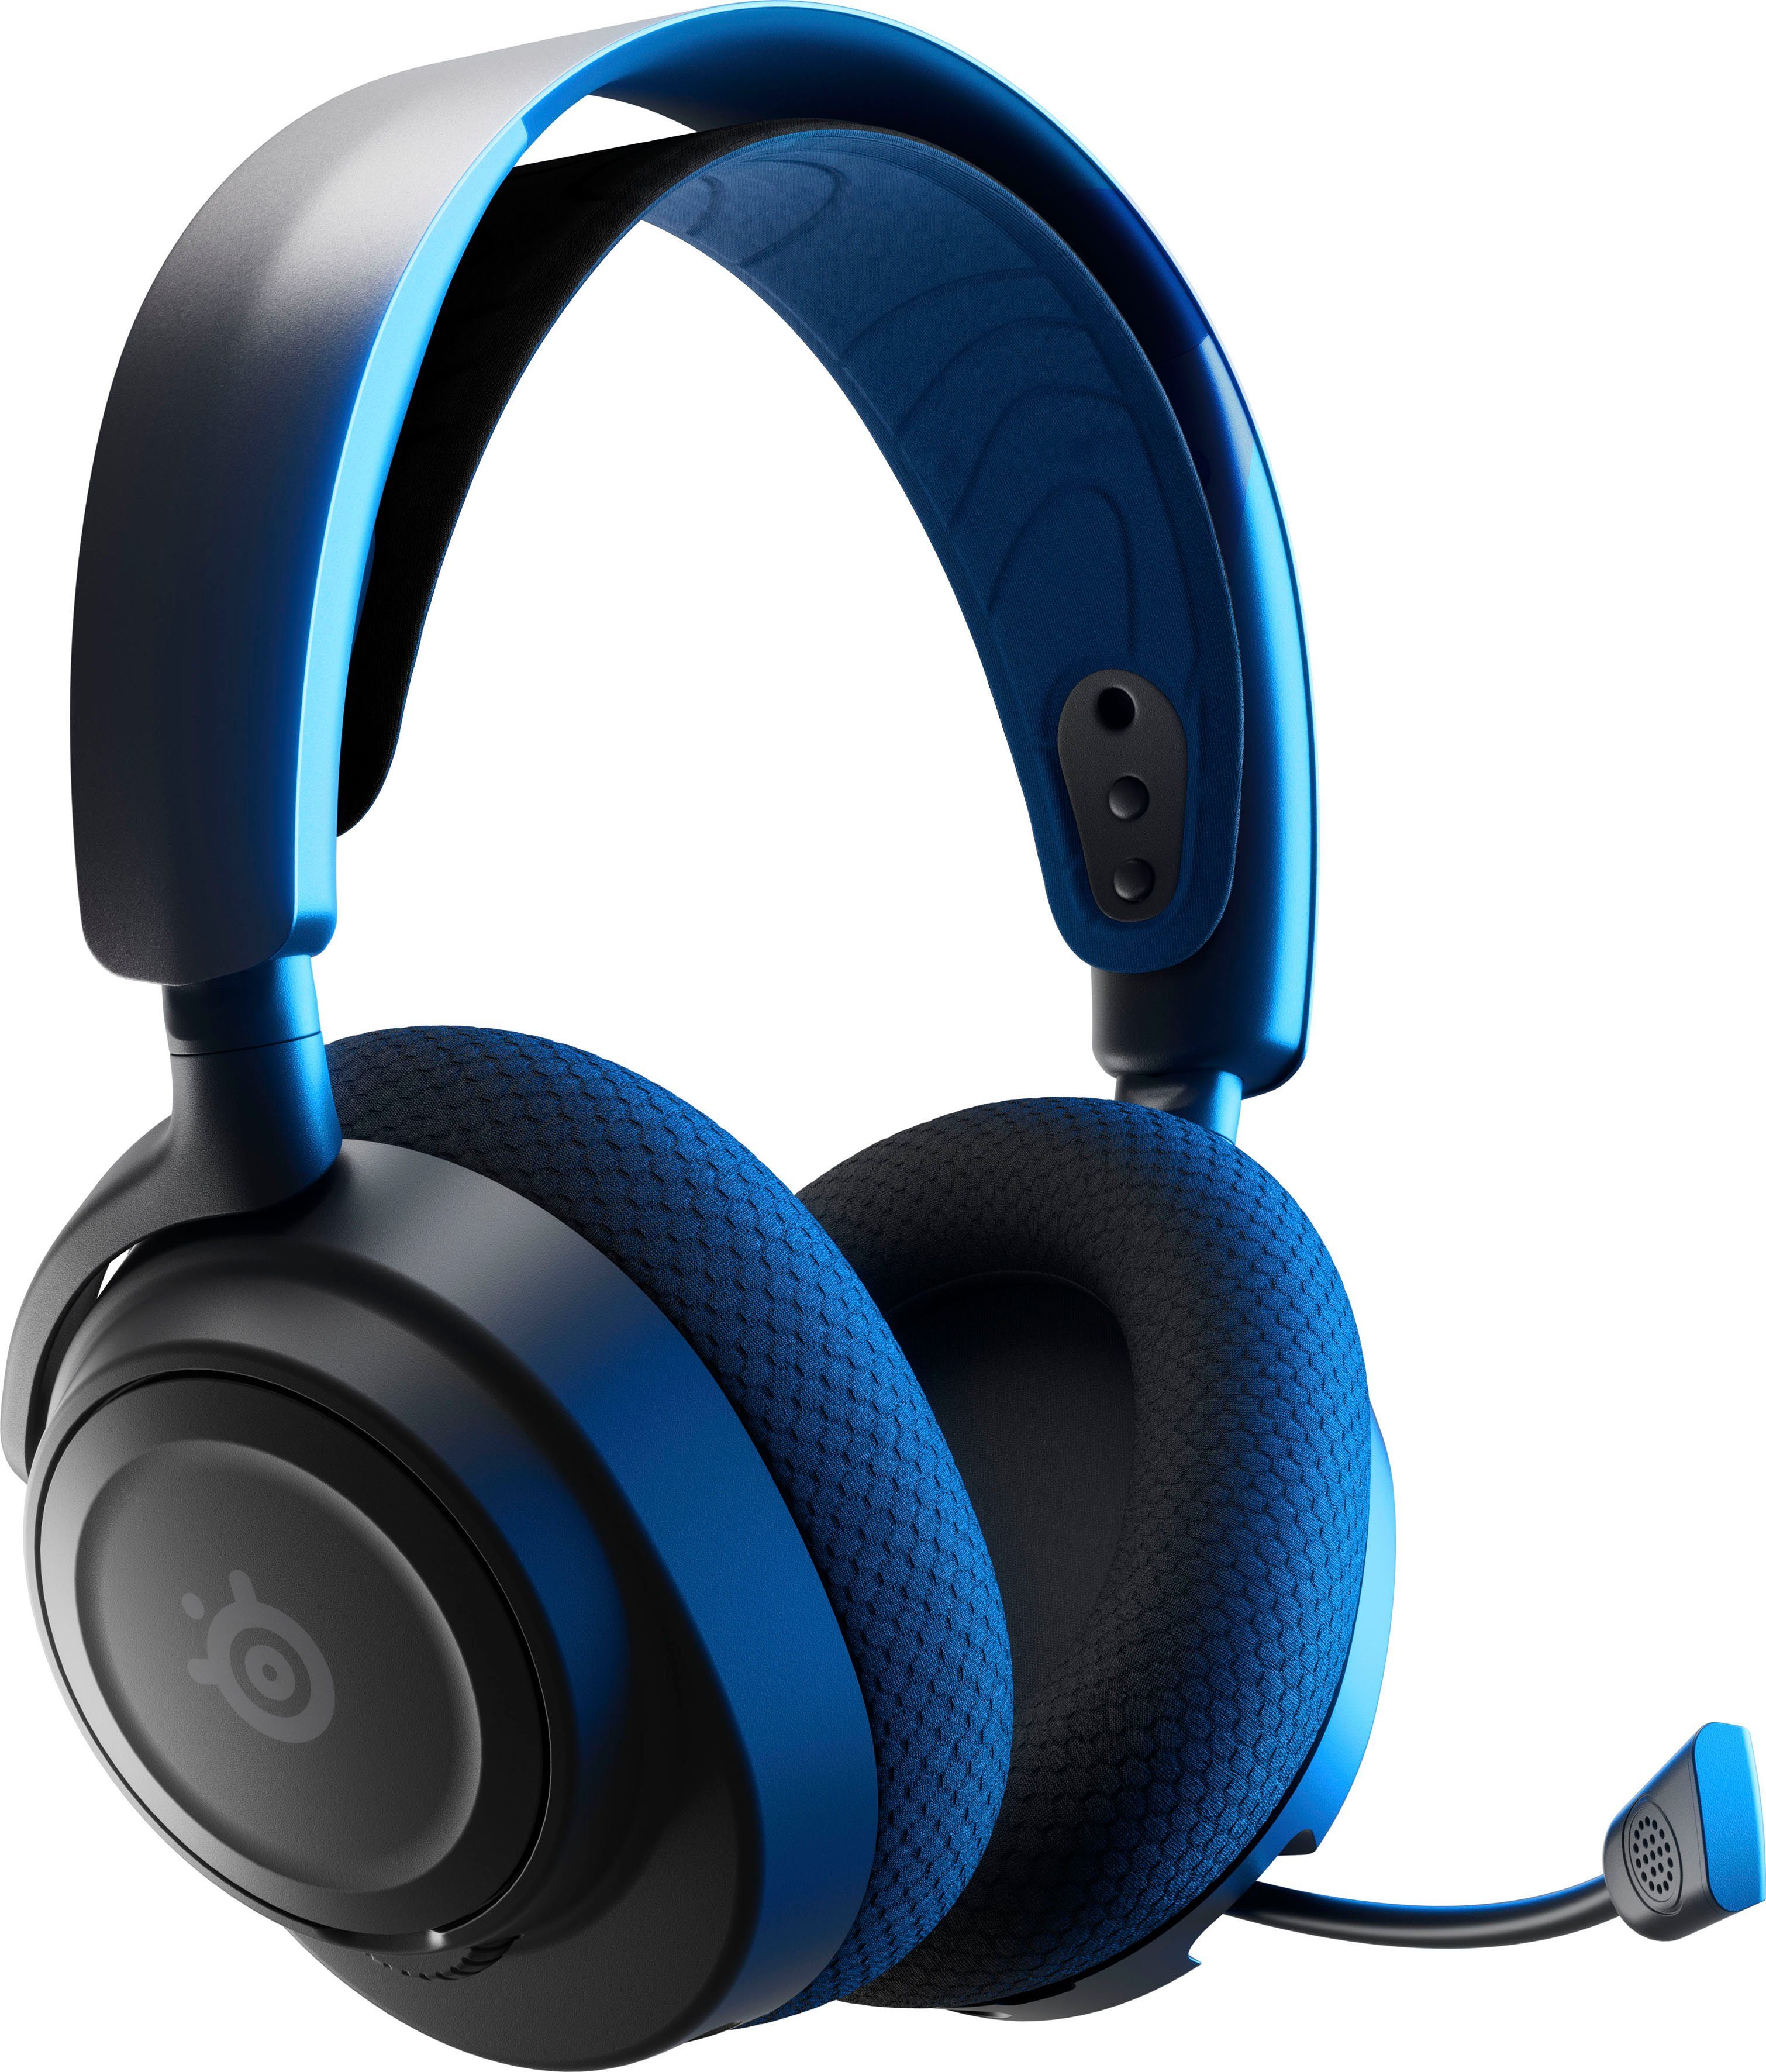 (Noise-Cancelling, Acoustic SteelSeries Wireless), Nova Gaming-Headset System 7P Arctis Bluetooth, Nova